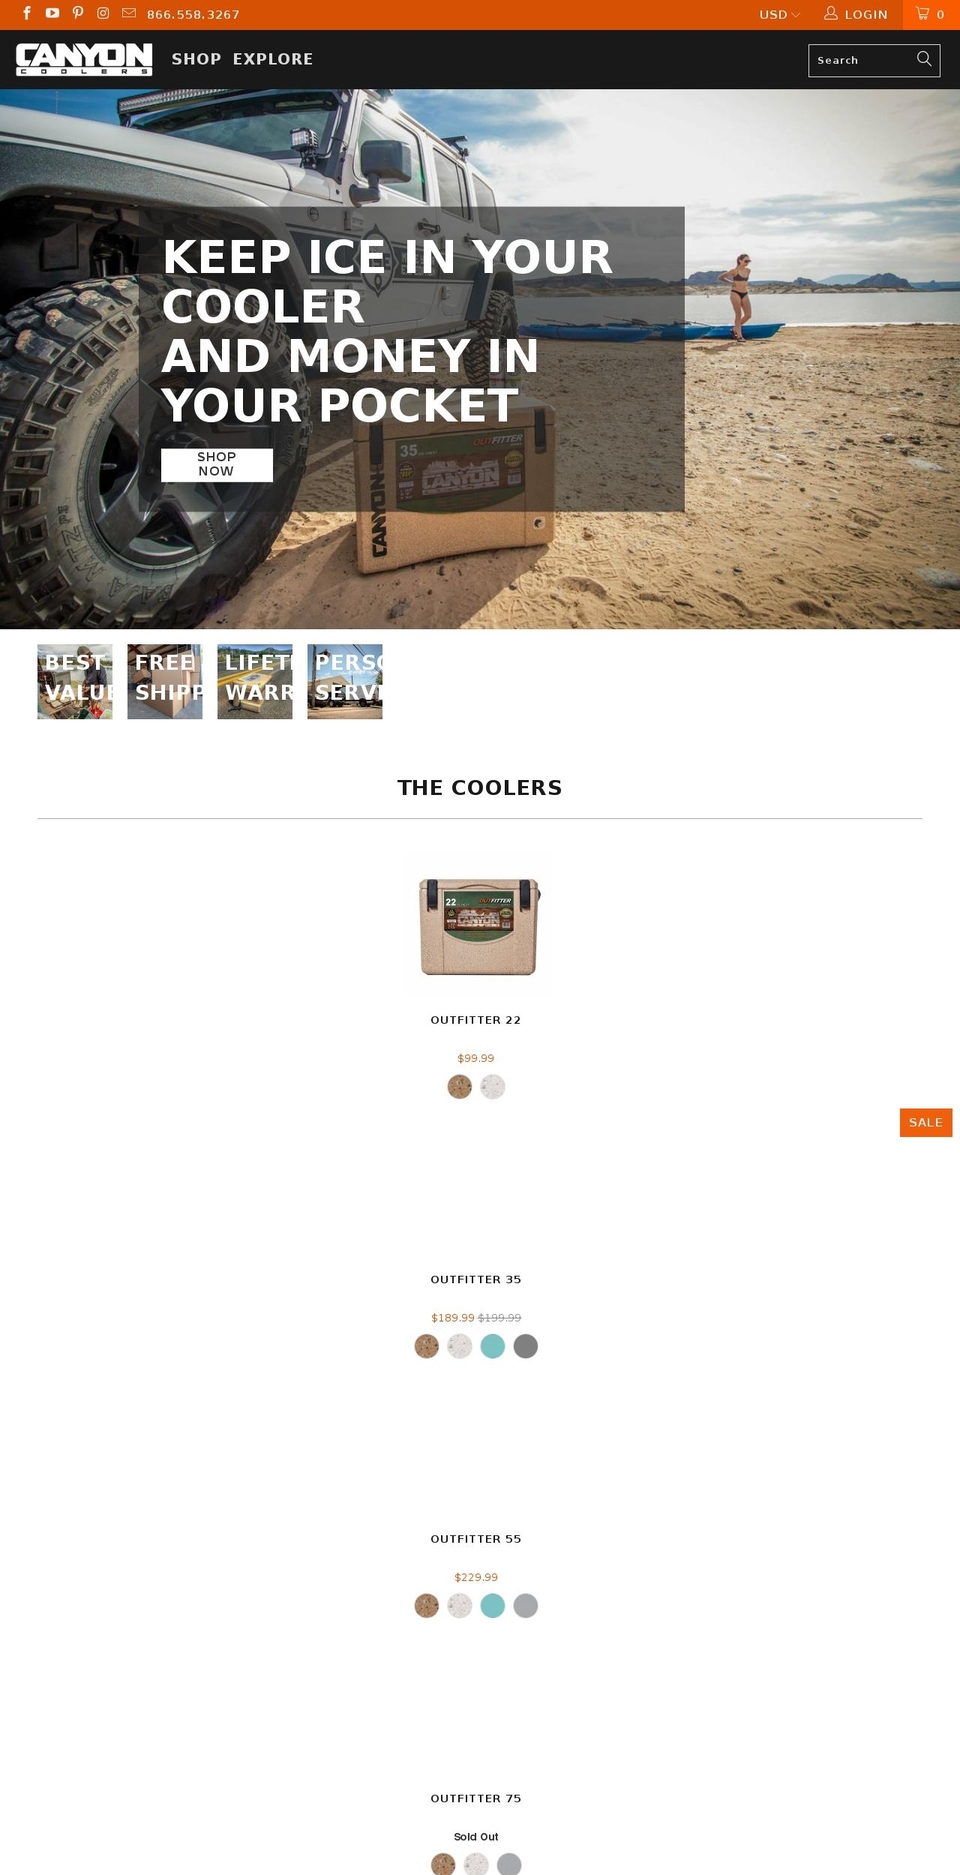 Turbo-portland Shopify theme site example canyoncoolers.com